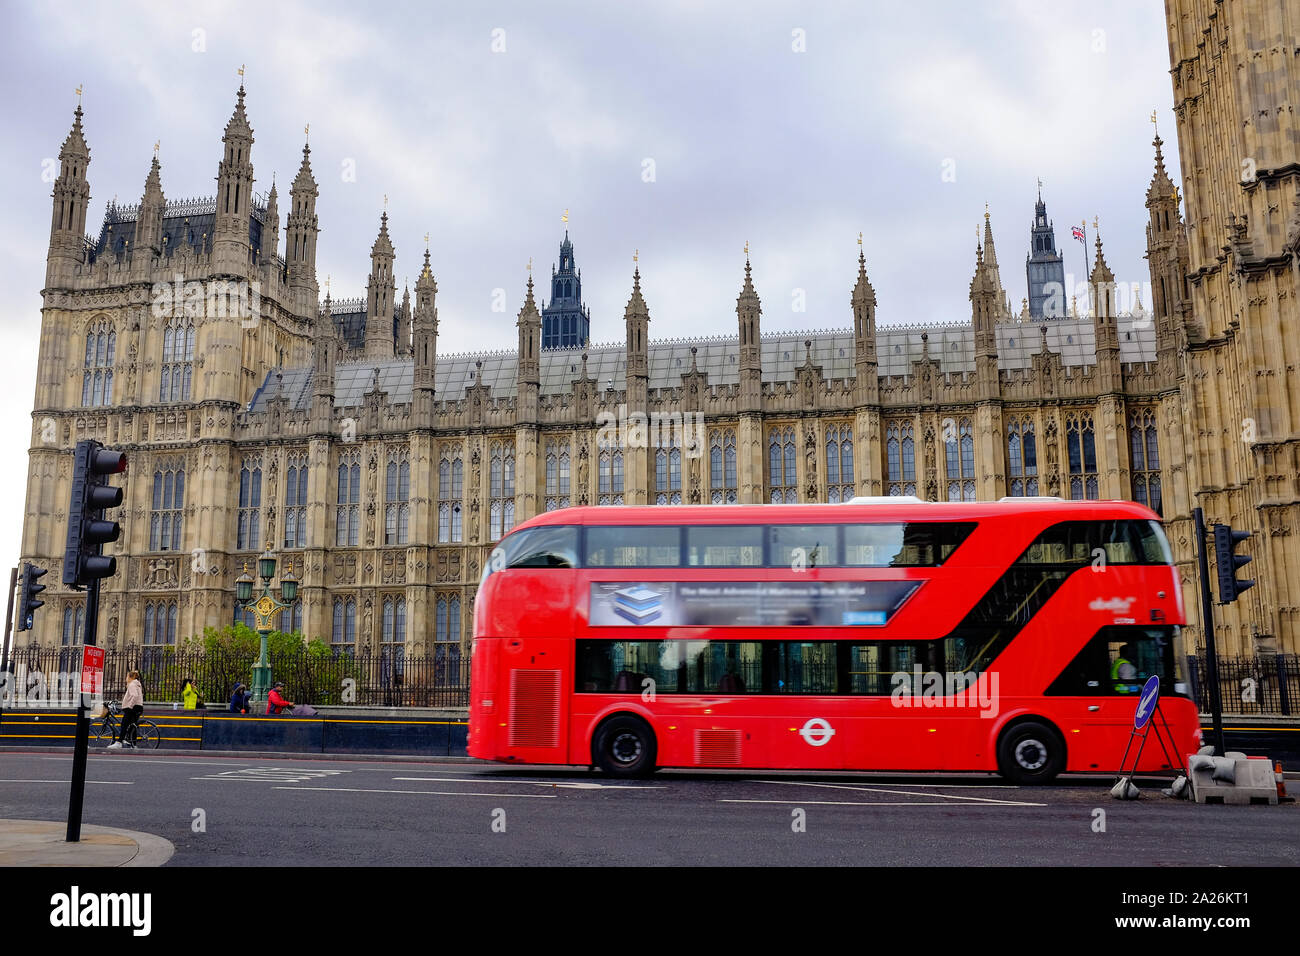 London famous red bus transport over westminster big ben palace, england travel destination Stock Photo